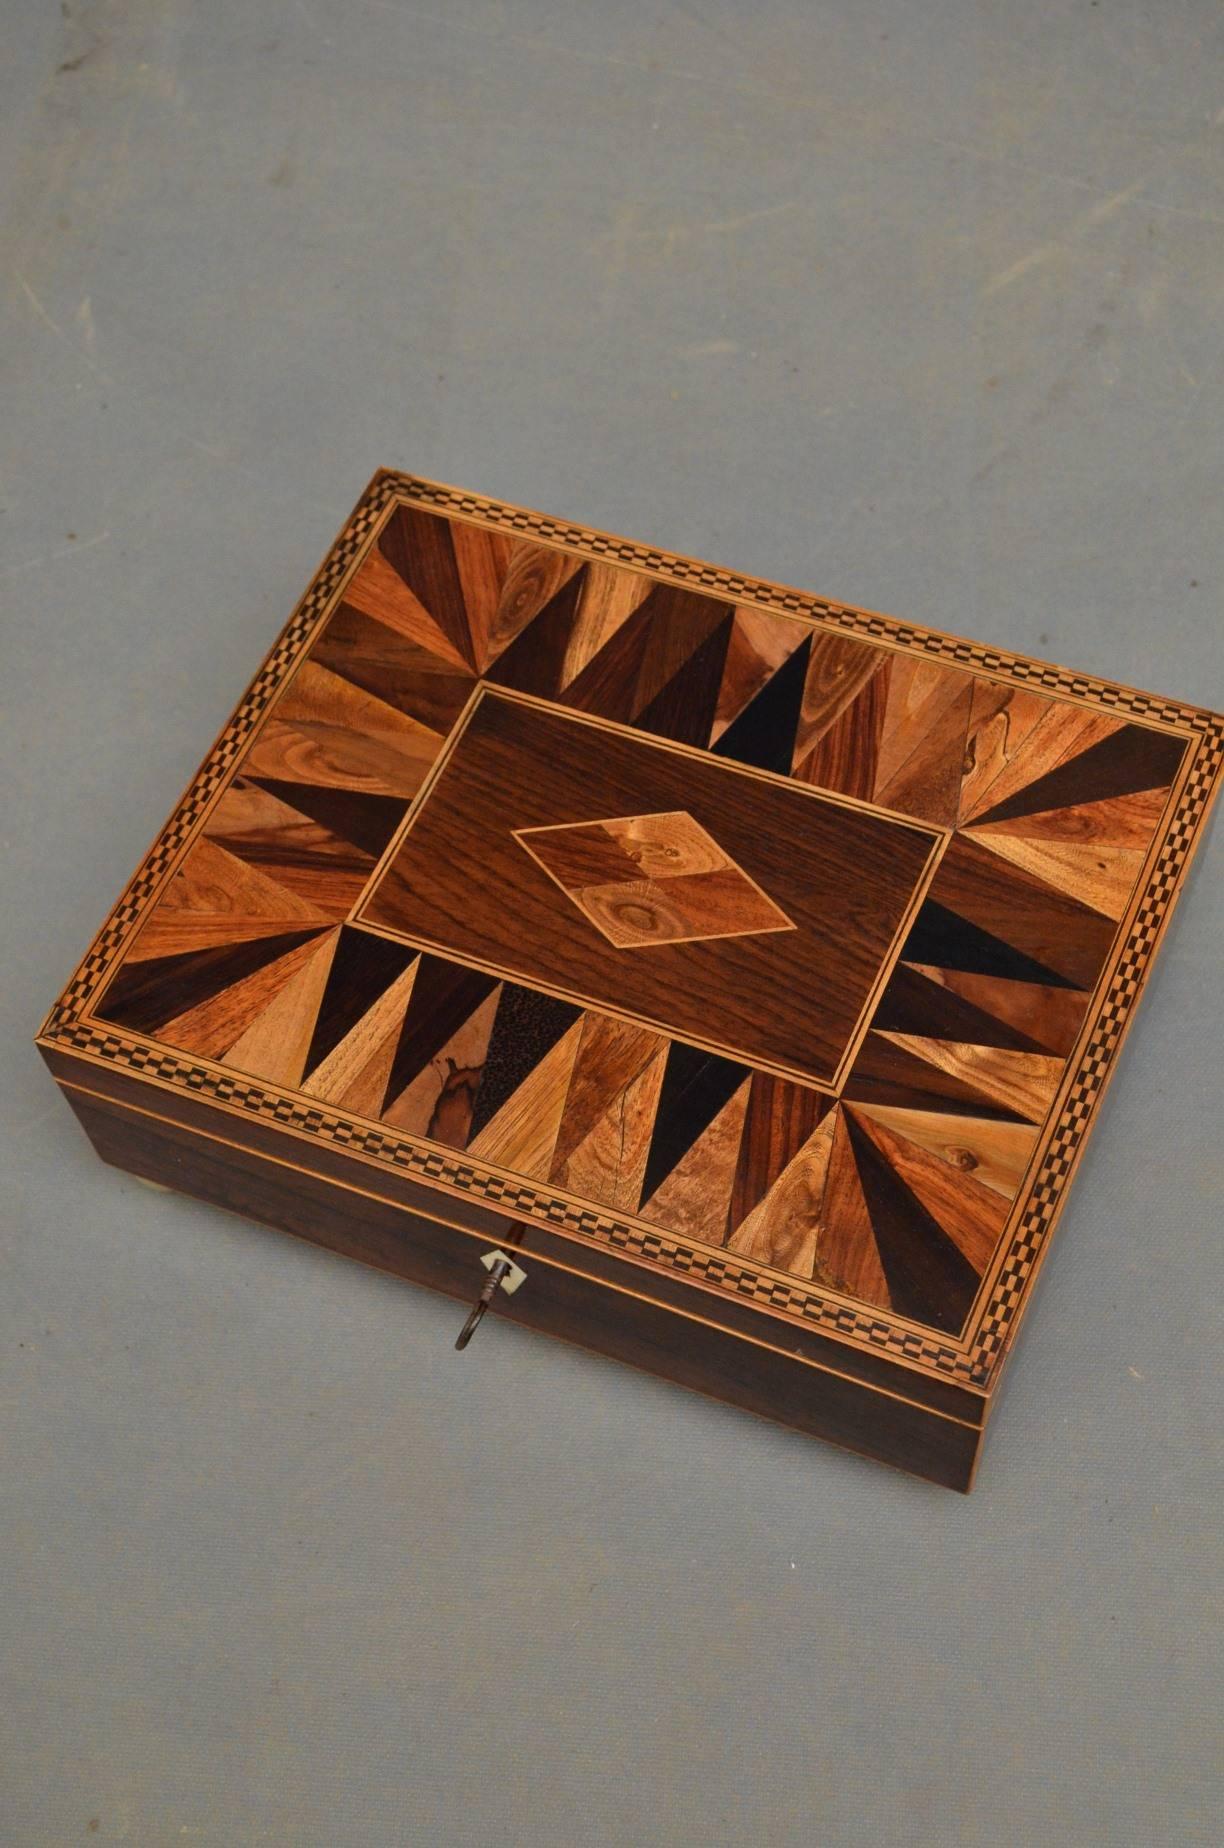 K0259 fine Regency rosewood jewellery box, having exotic wood geometrical inlay to top which open to reveal relined interior with lift up tray, all with chequered edge and fitted with working lock and standing on brass ball feet. This Regency sewing